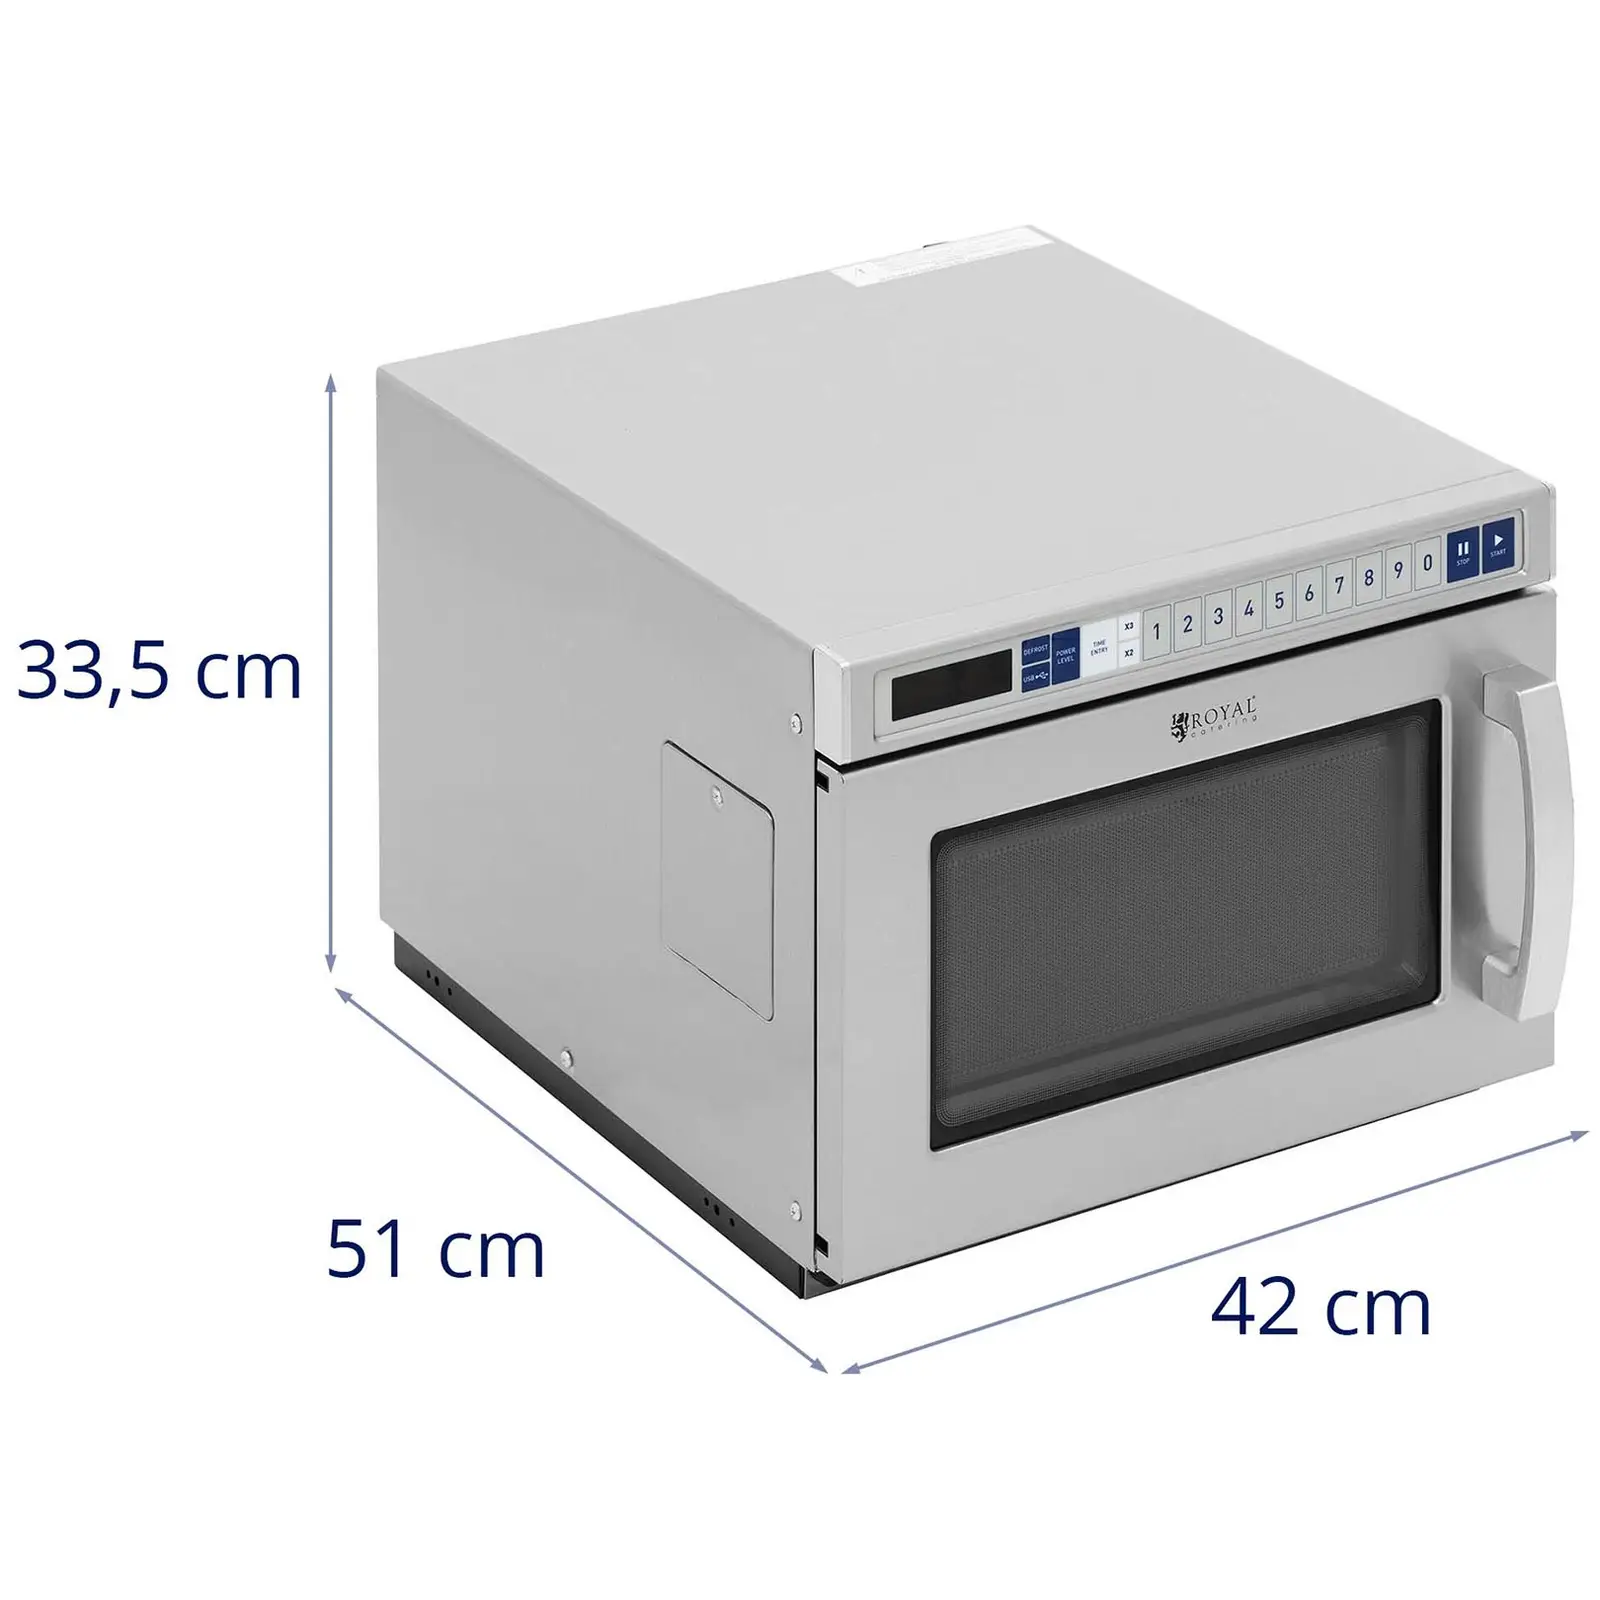 Forno microondas - catering - 3000 W - 17 l - Royal Catering